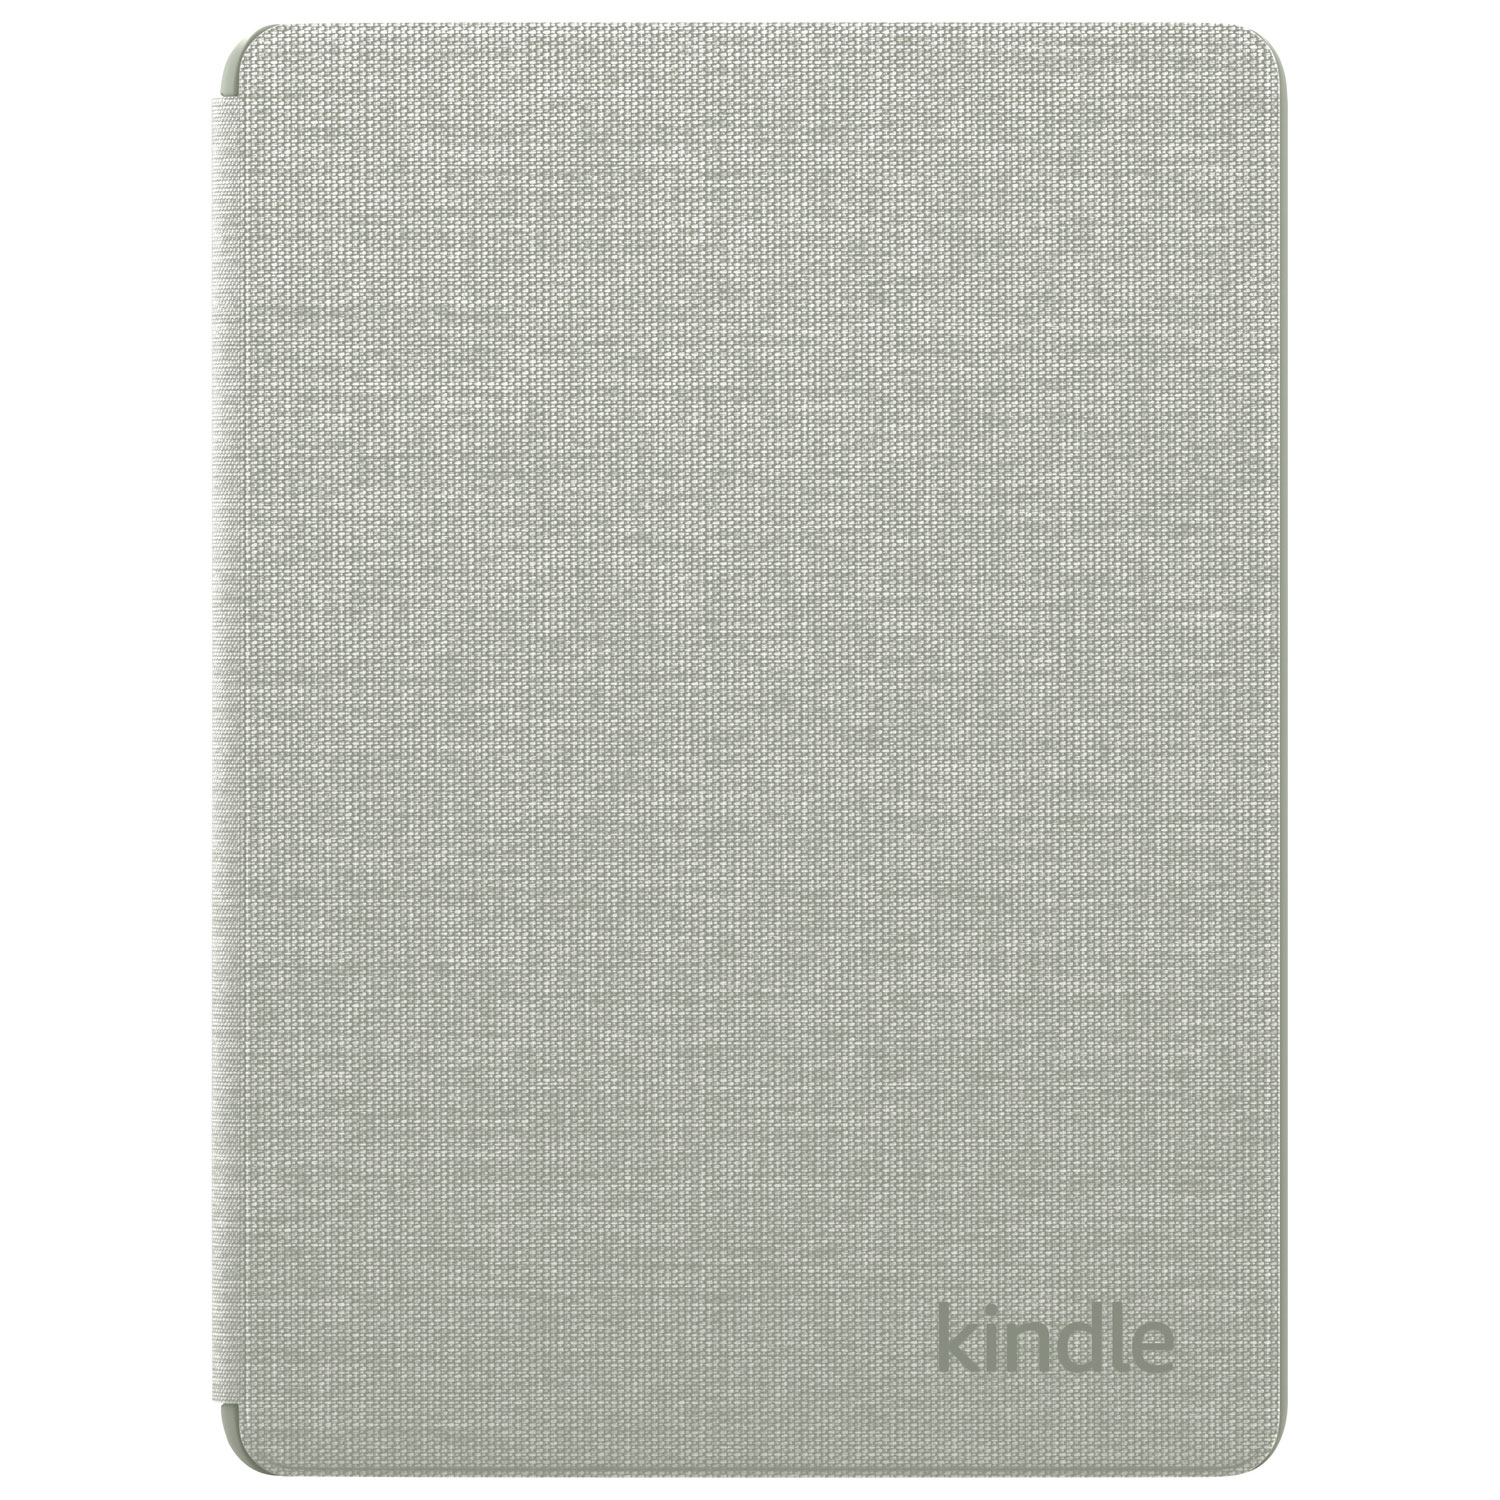 Amazon Kindle Paperwhite (11th Generation) Fabric Cover - Agave Green